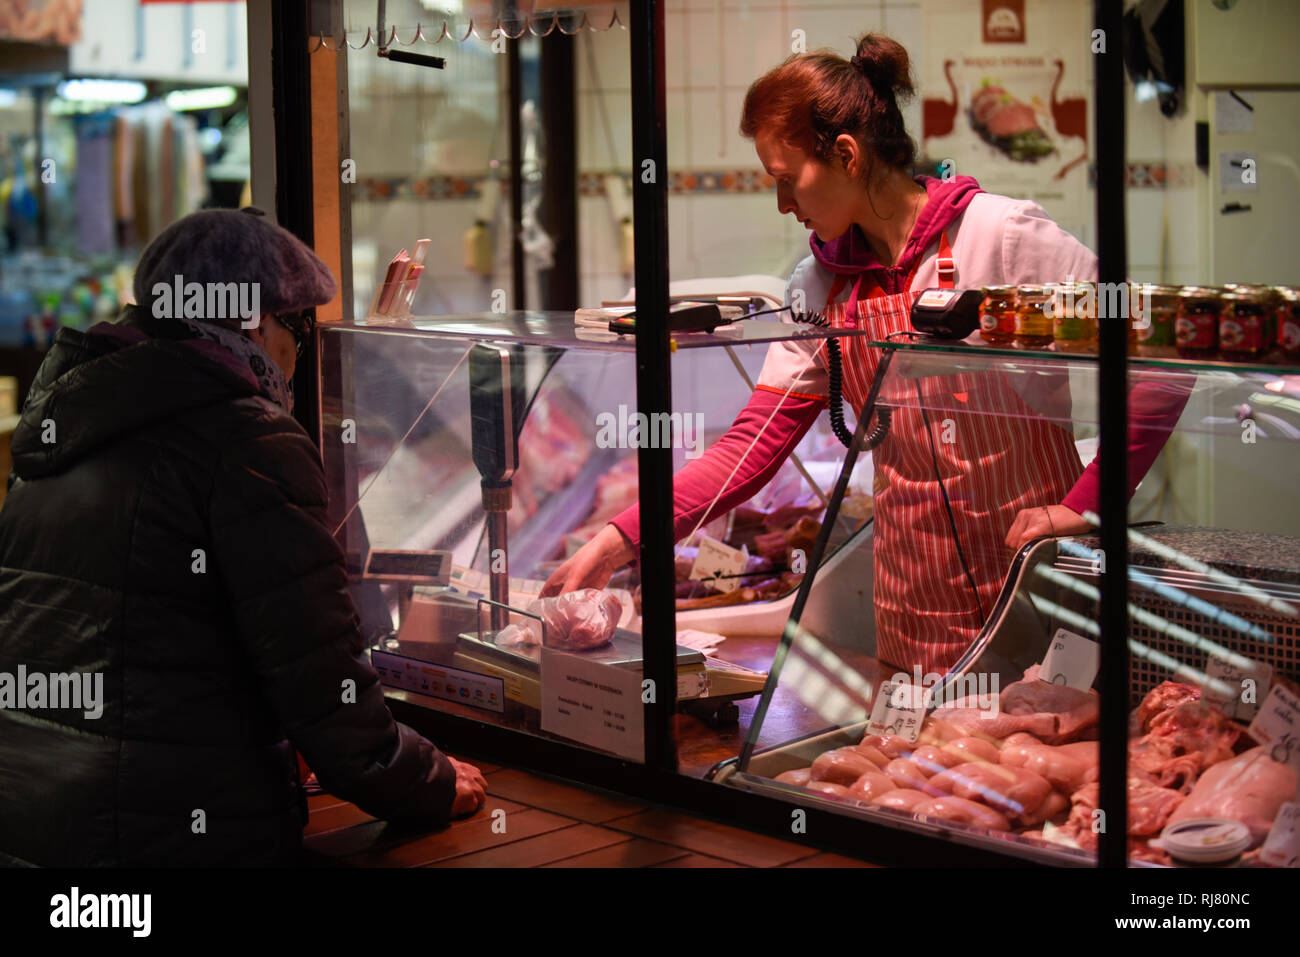 A woman seems buying pieces of meat at a meat market. European Union investigators began a weeklong visit to Poland on Monday after a video showing sick cows being illegally slaughtered during night at a slaughterhouse in the northeastern Polish town of Ostrow Mazowiecka . The meat from the abattoir went to Estonia, Finland, France, Hungary, Lithuania, Portugal, Romania, Spain, and Sweden. European Union investigators began a weeklong visit to Poland on Monday for inspections. Stock Photo